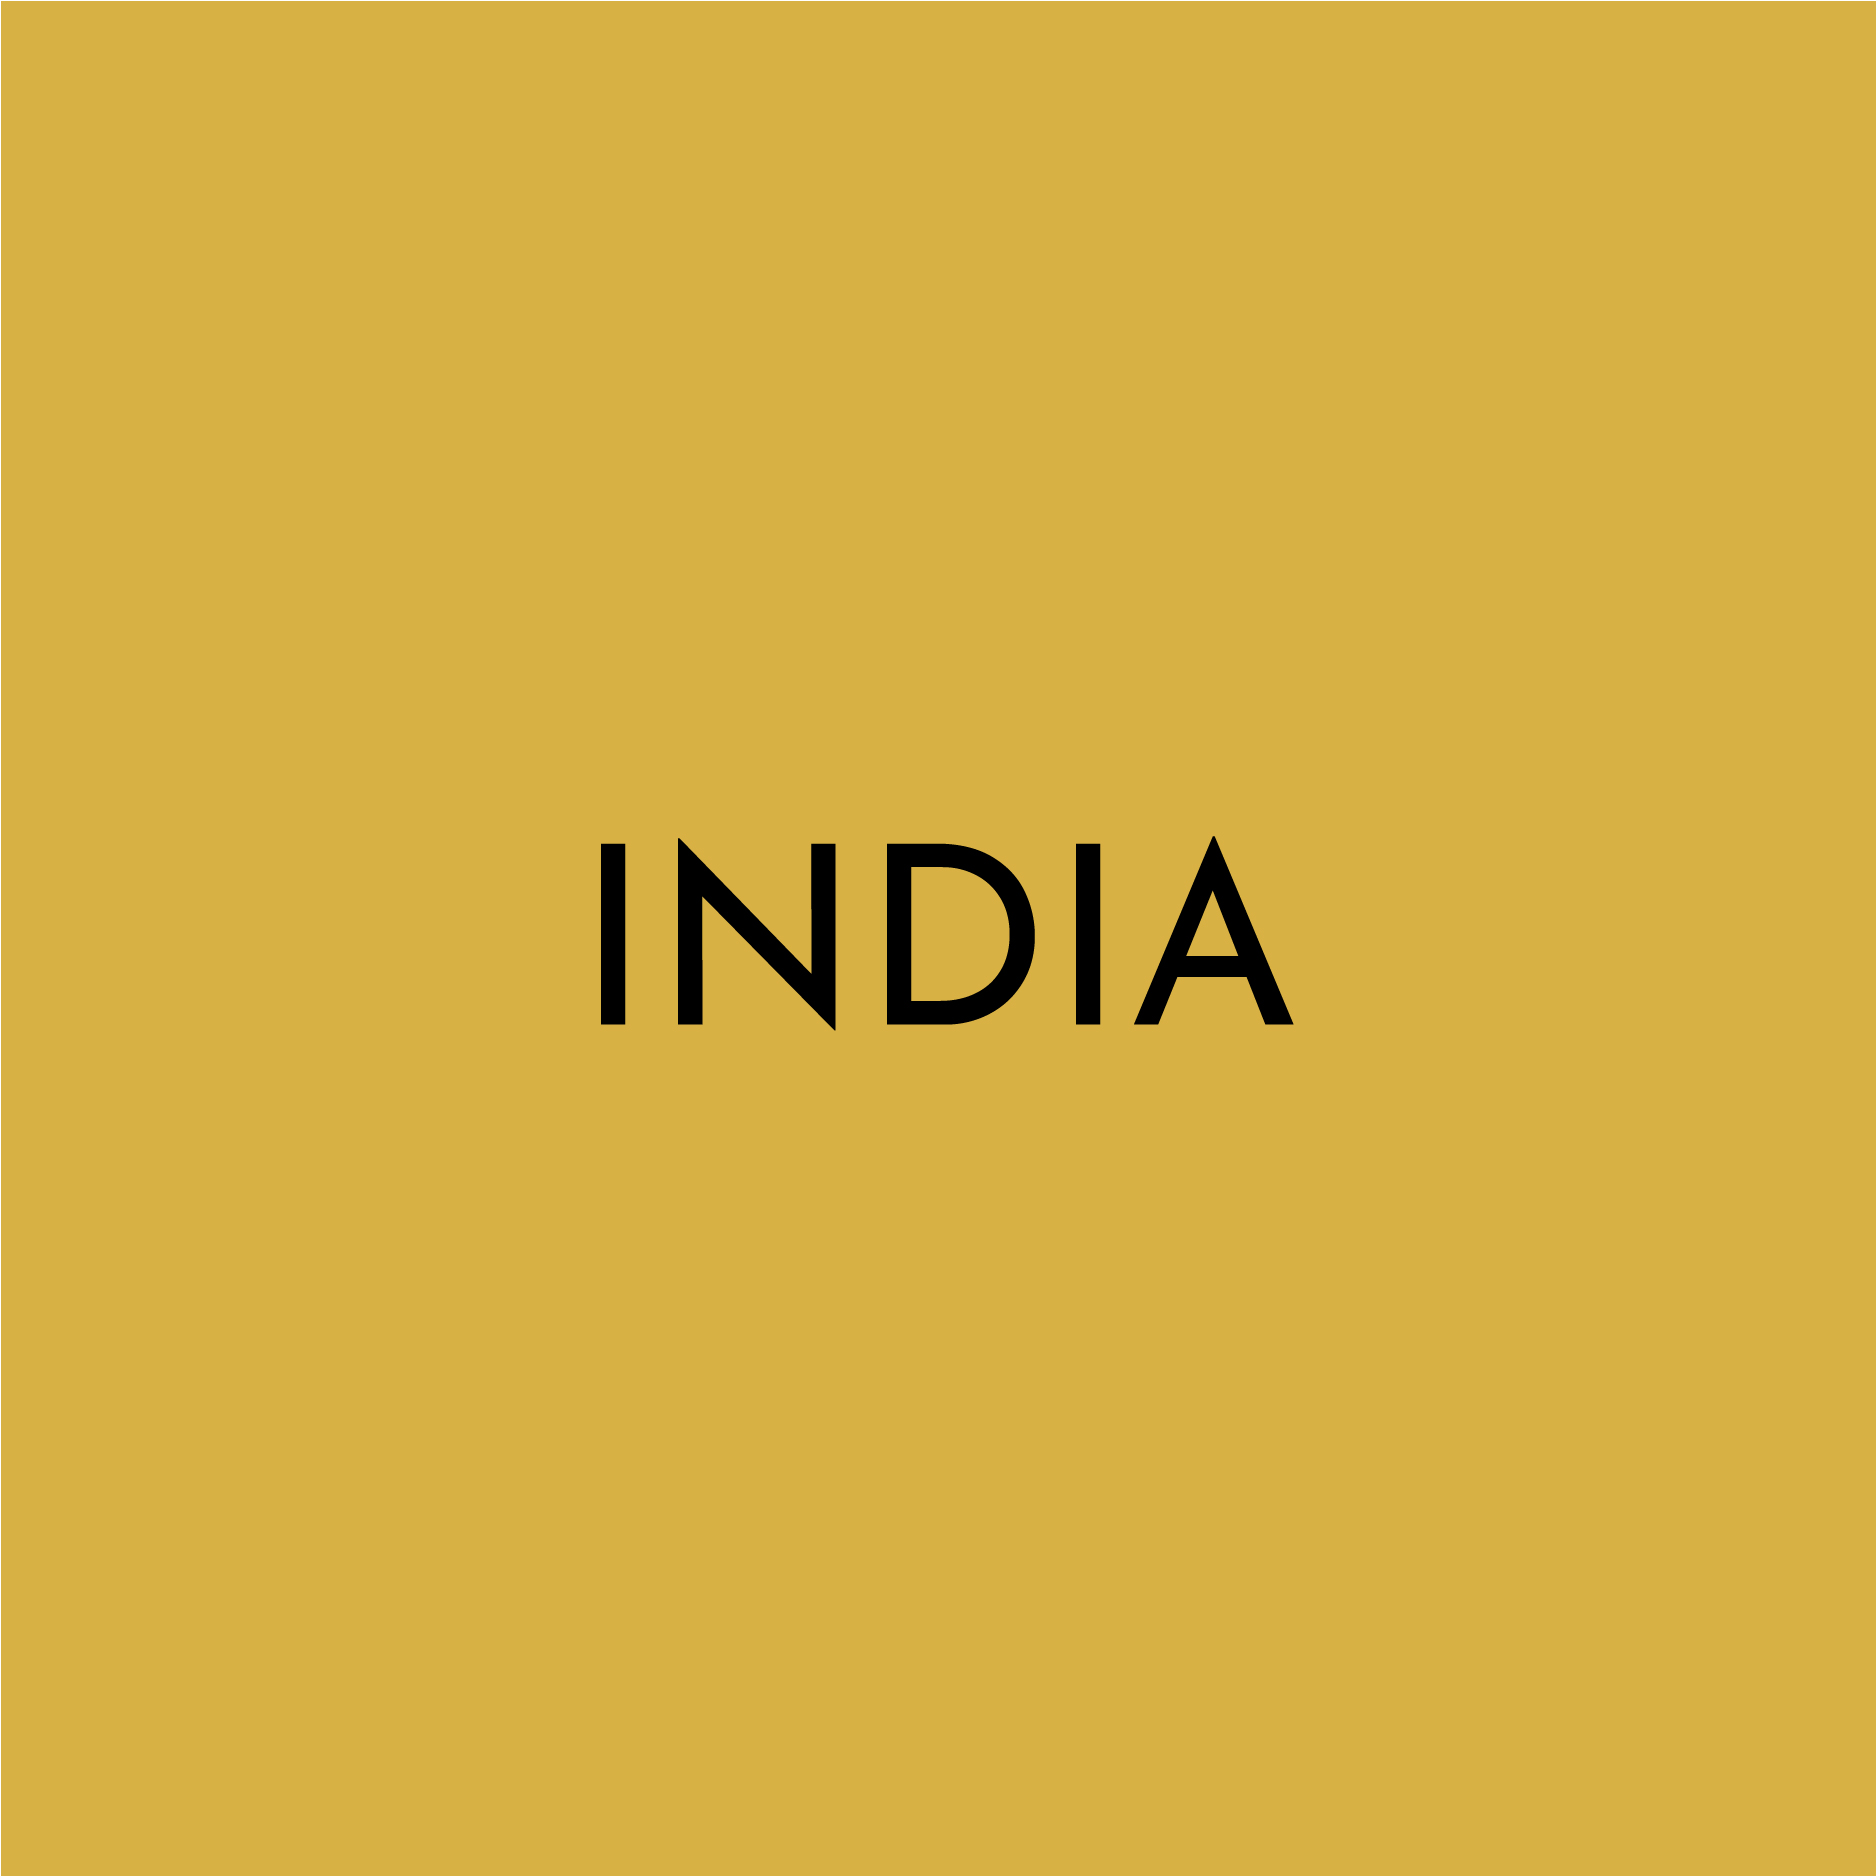 A solid yellow block contains the text “INDIA”